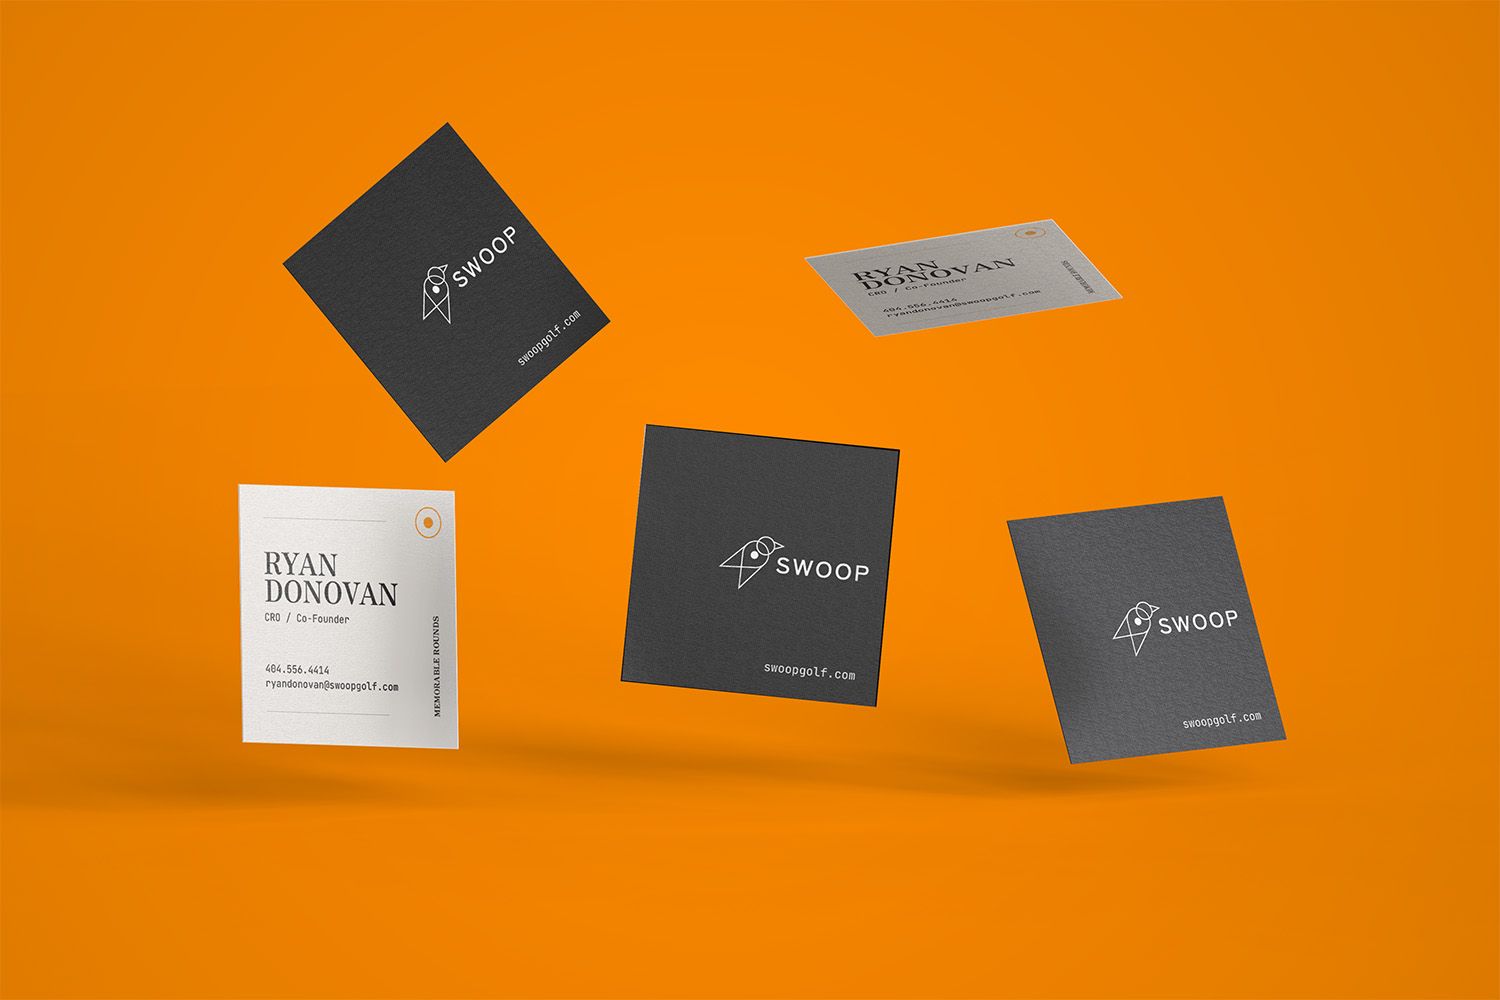 Swoop Business Cards against an orange background